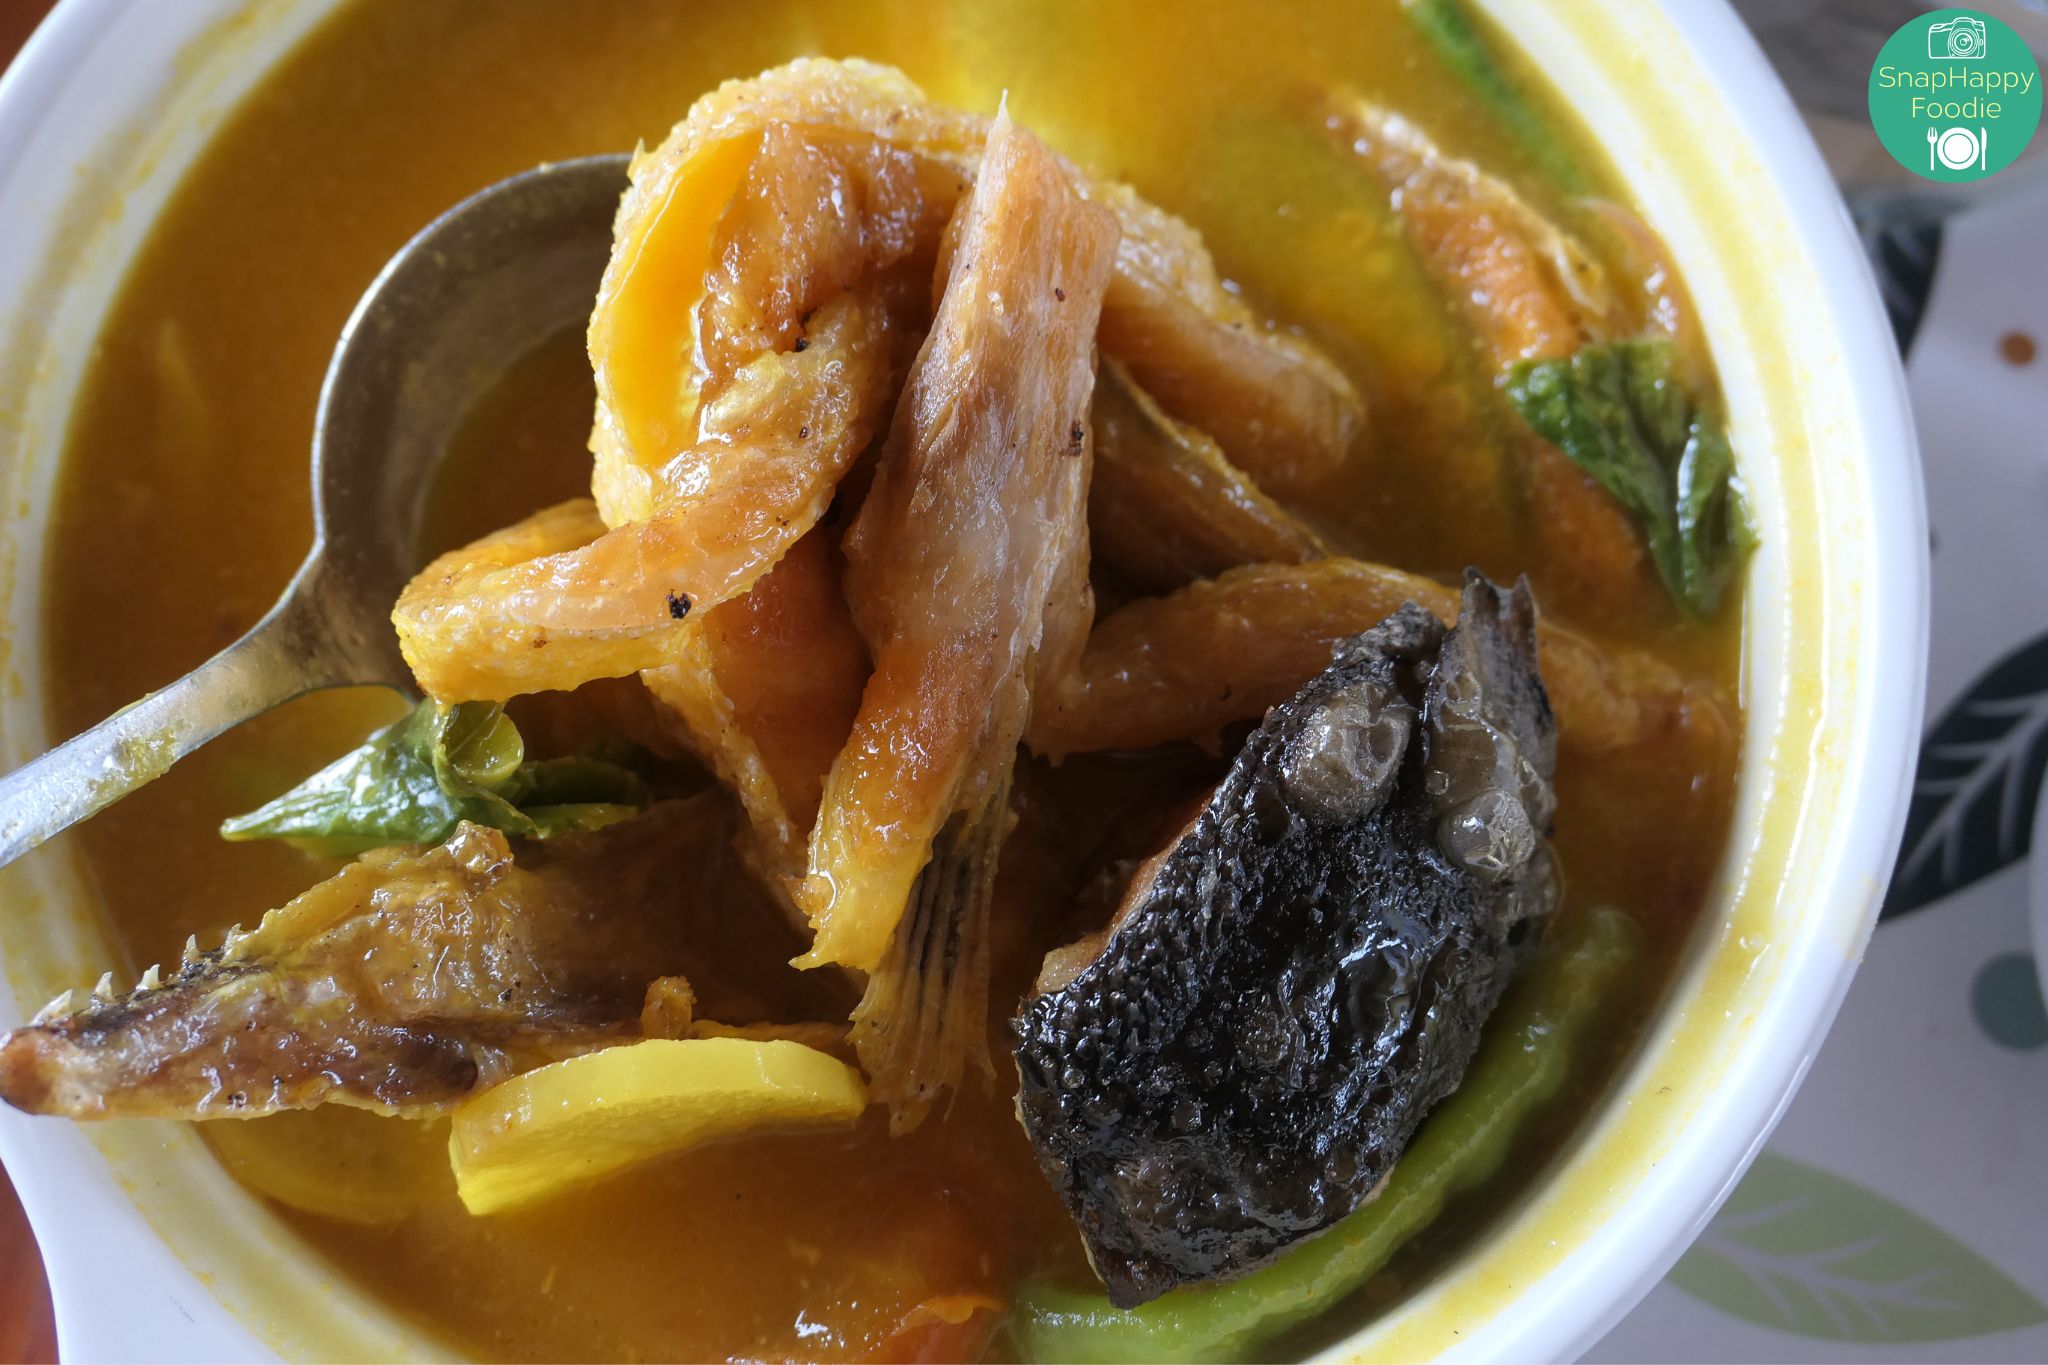 Salmon Sinigang - T'Viand Specials - SnapHappy Foodie | www.snaphappyfoodie.com